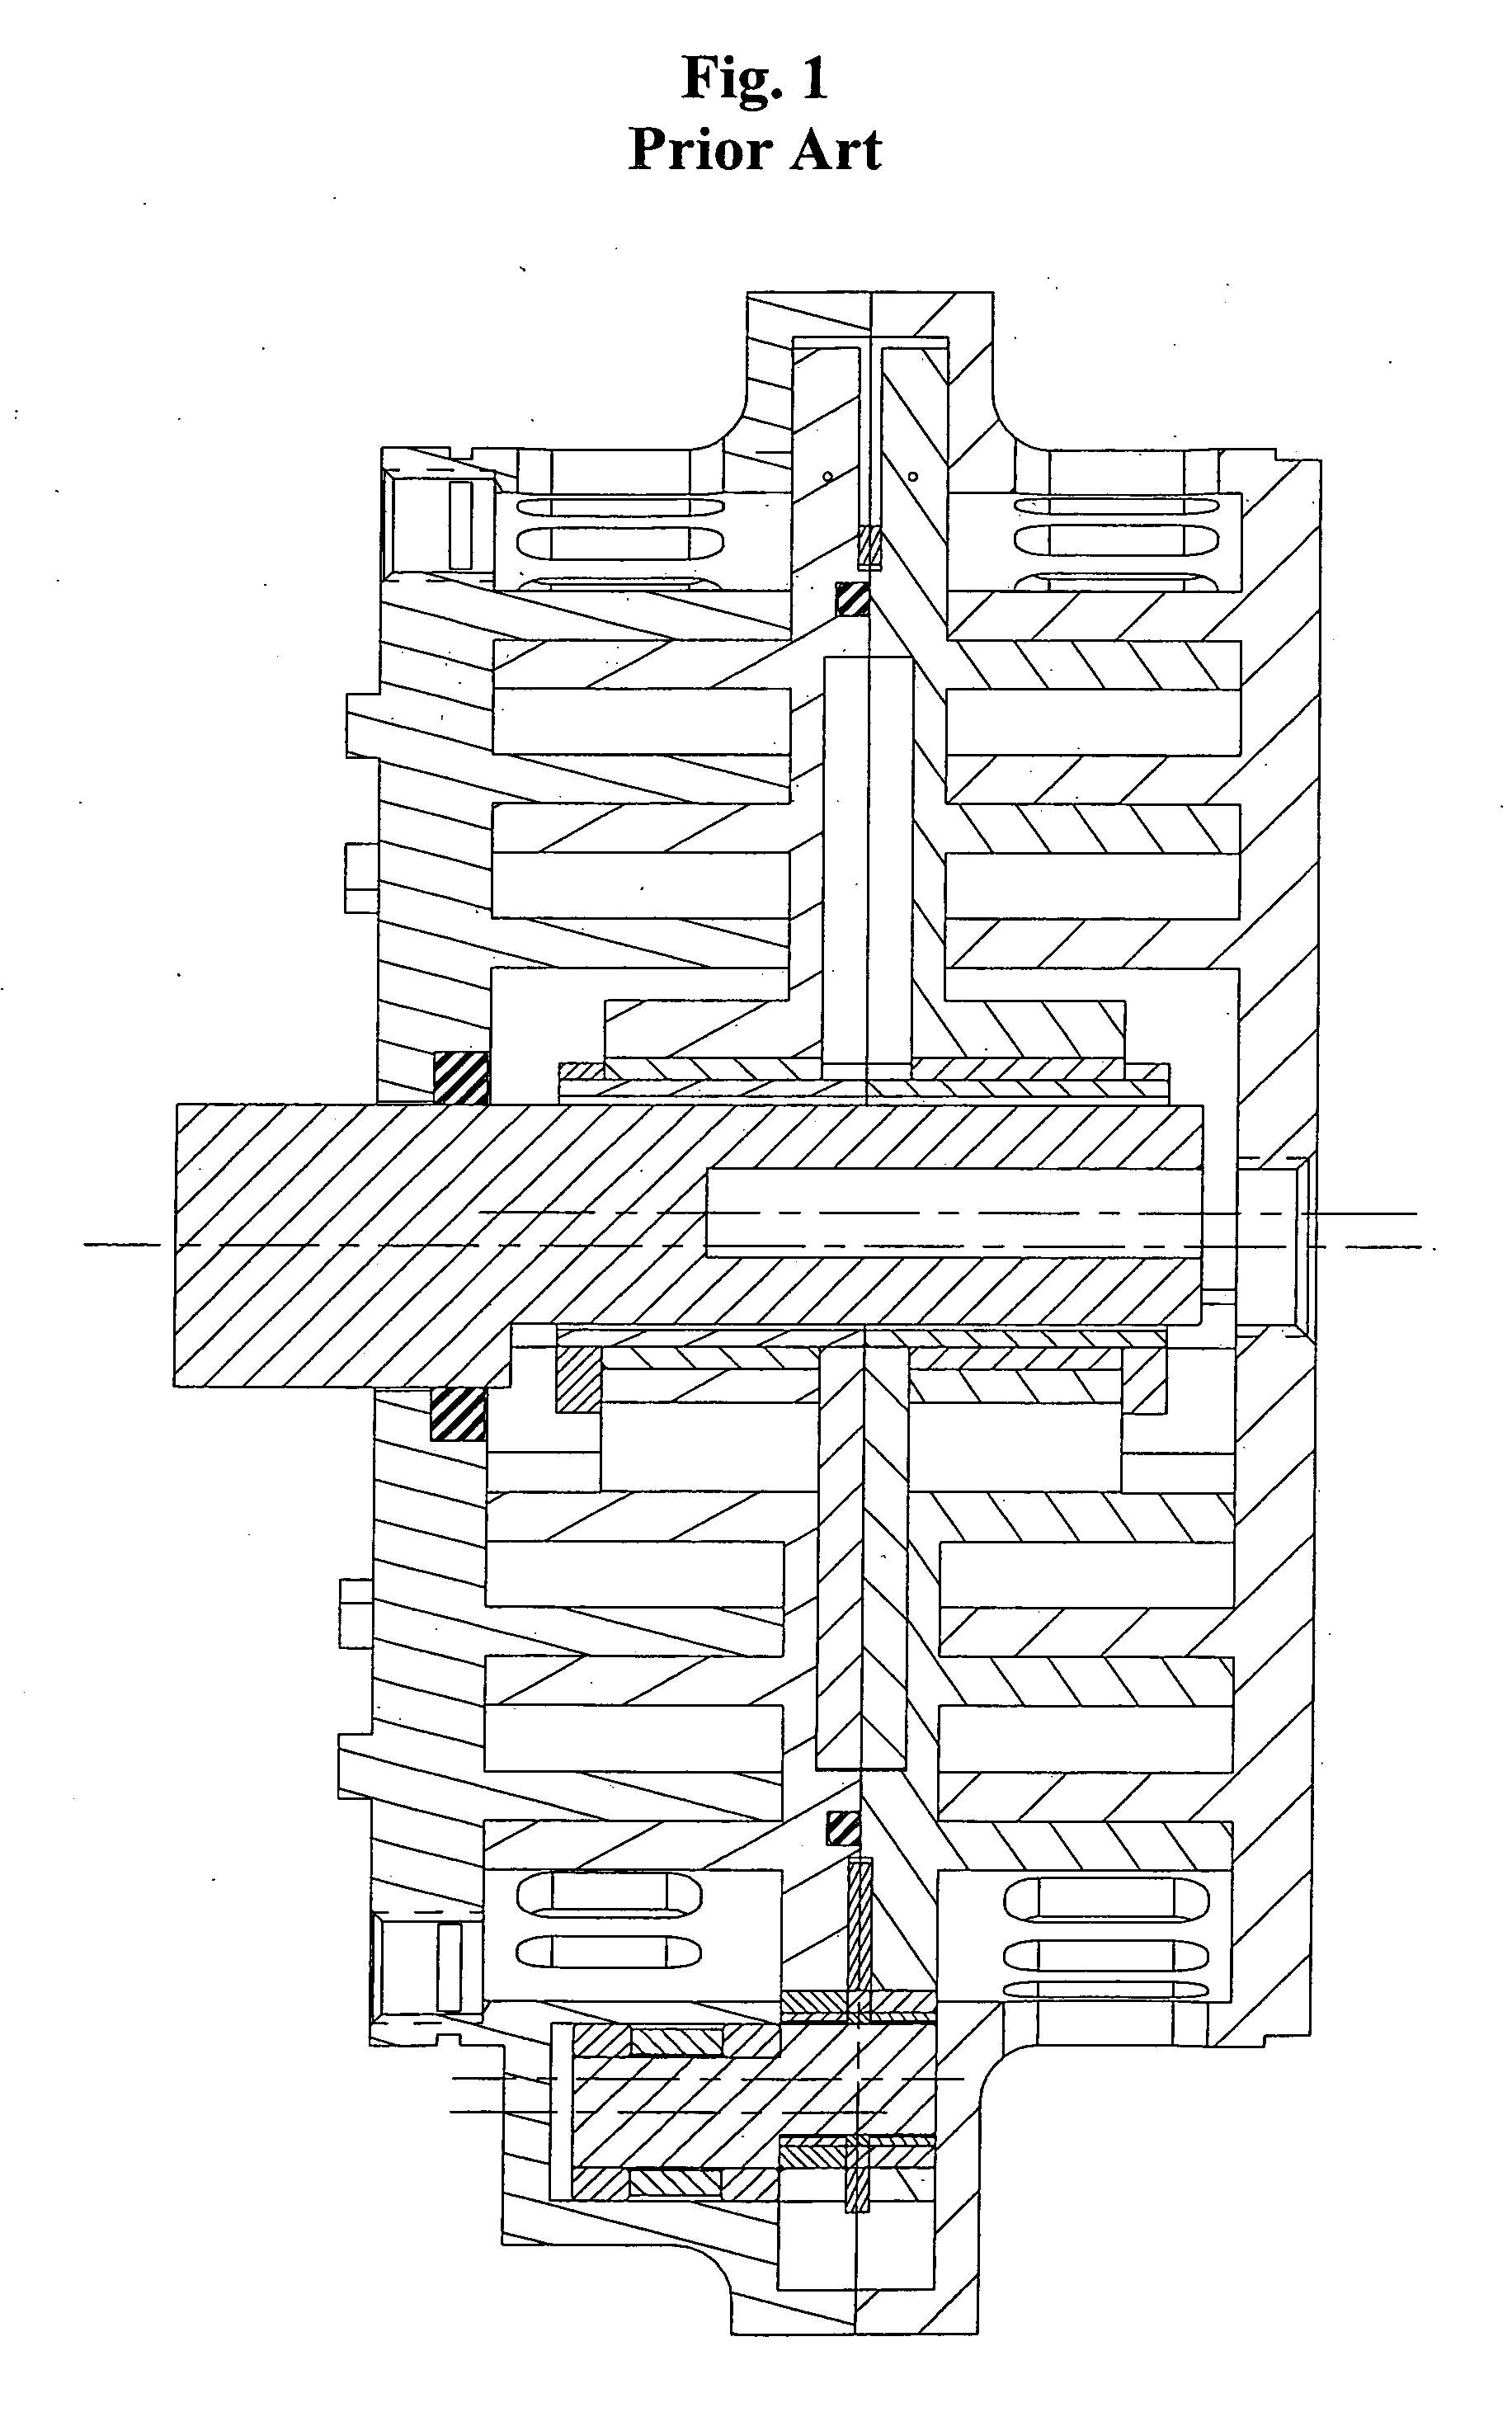 Scroll-type fluid displacement apparatus with fully compliant floating scrolls